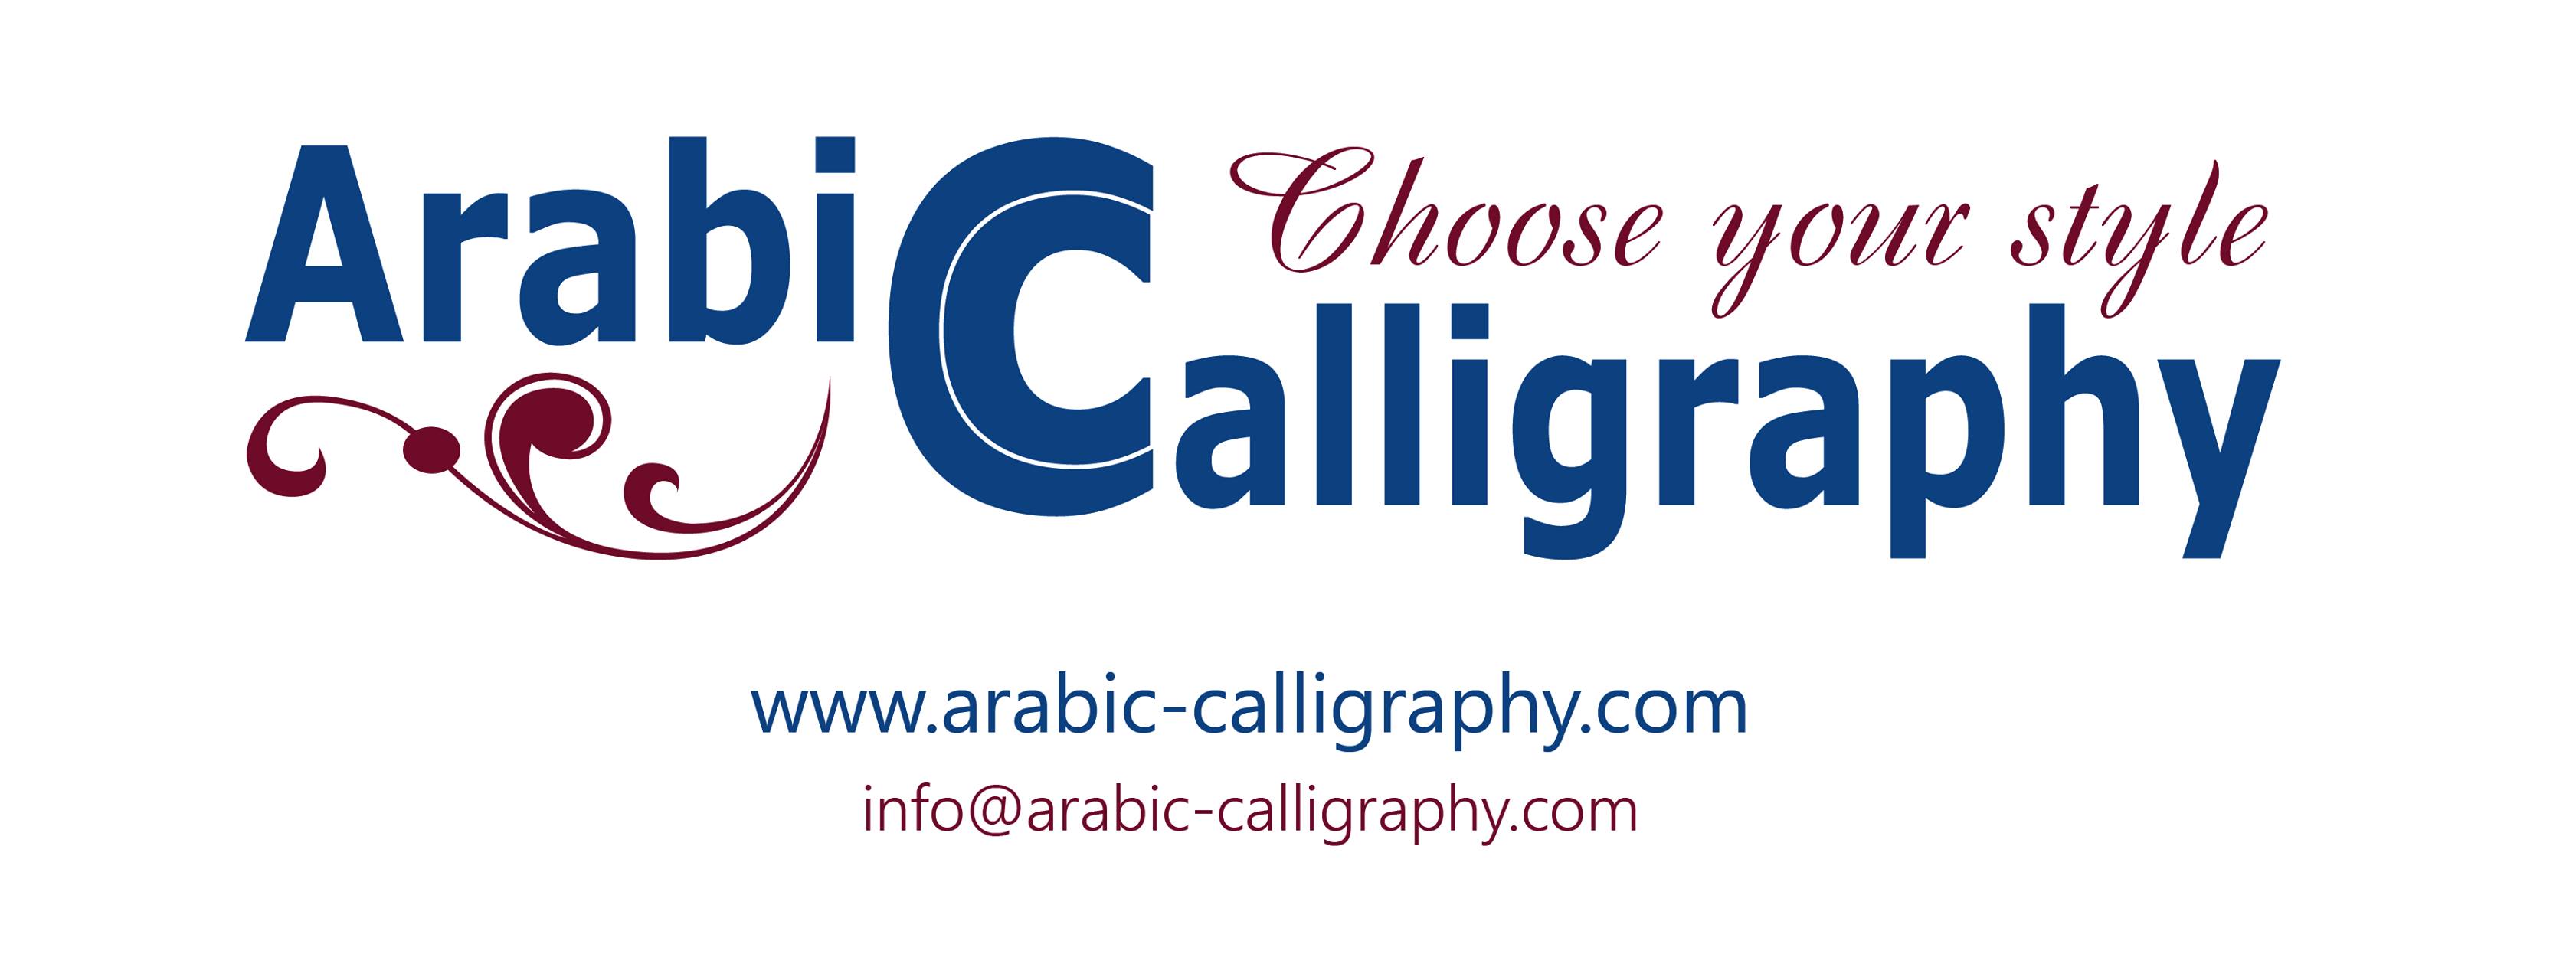 Arabic Calligraphy Services